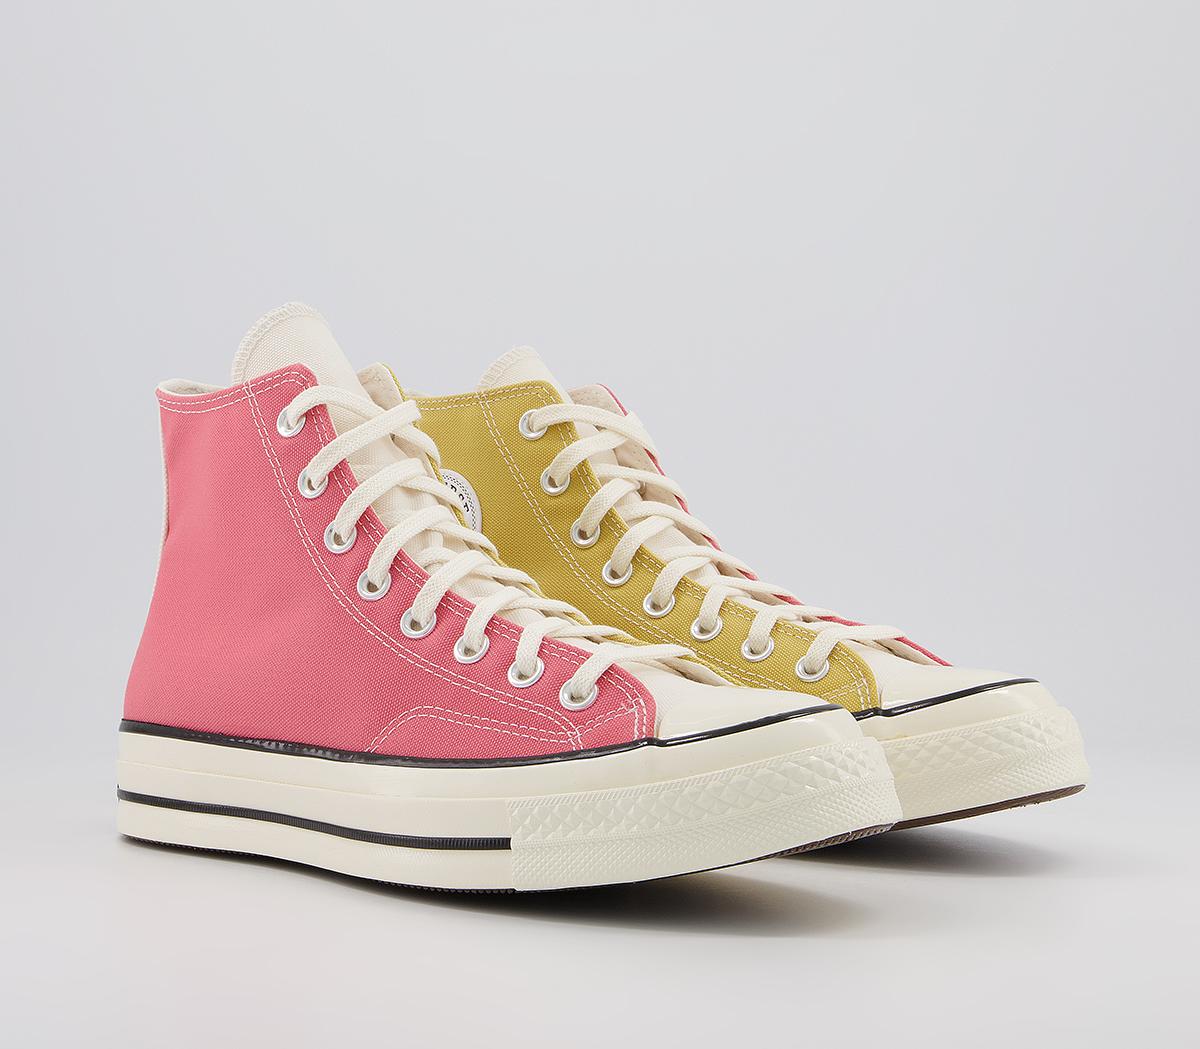 Converse All Star Hi 70s Trainers Saturn Gold Pink Salt - His trainers